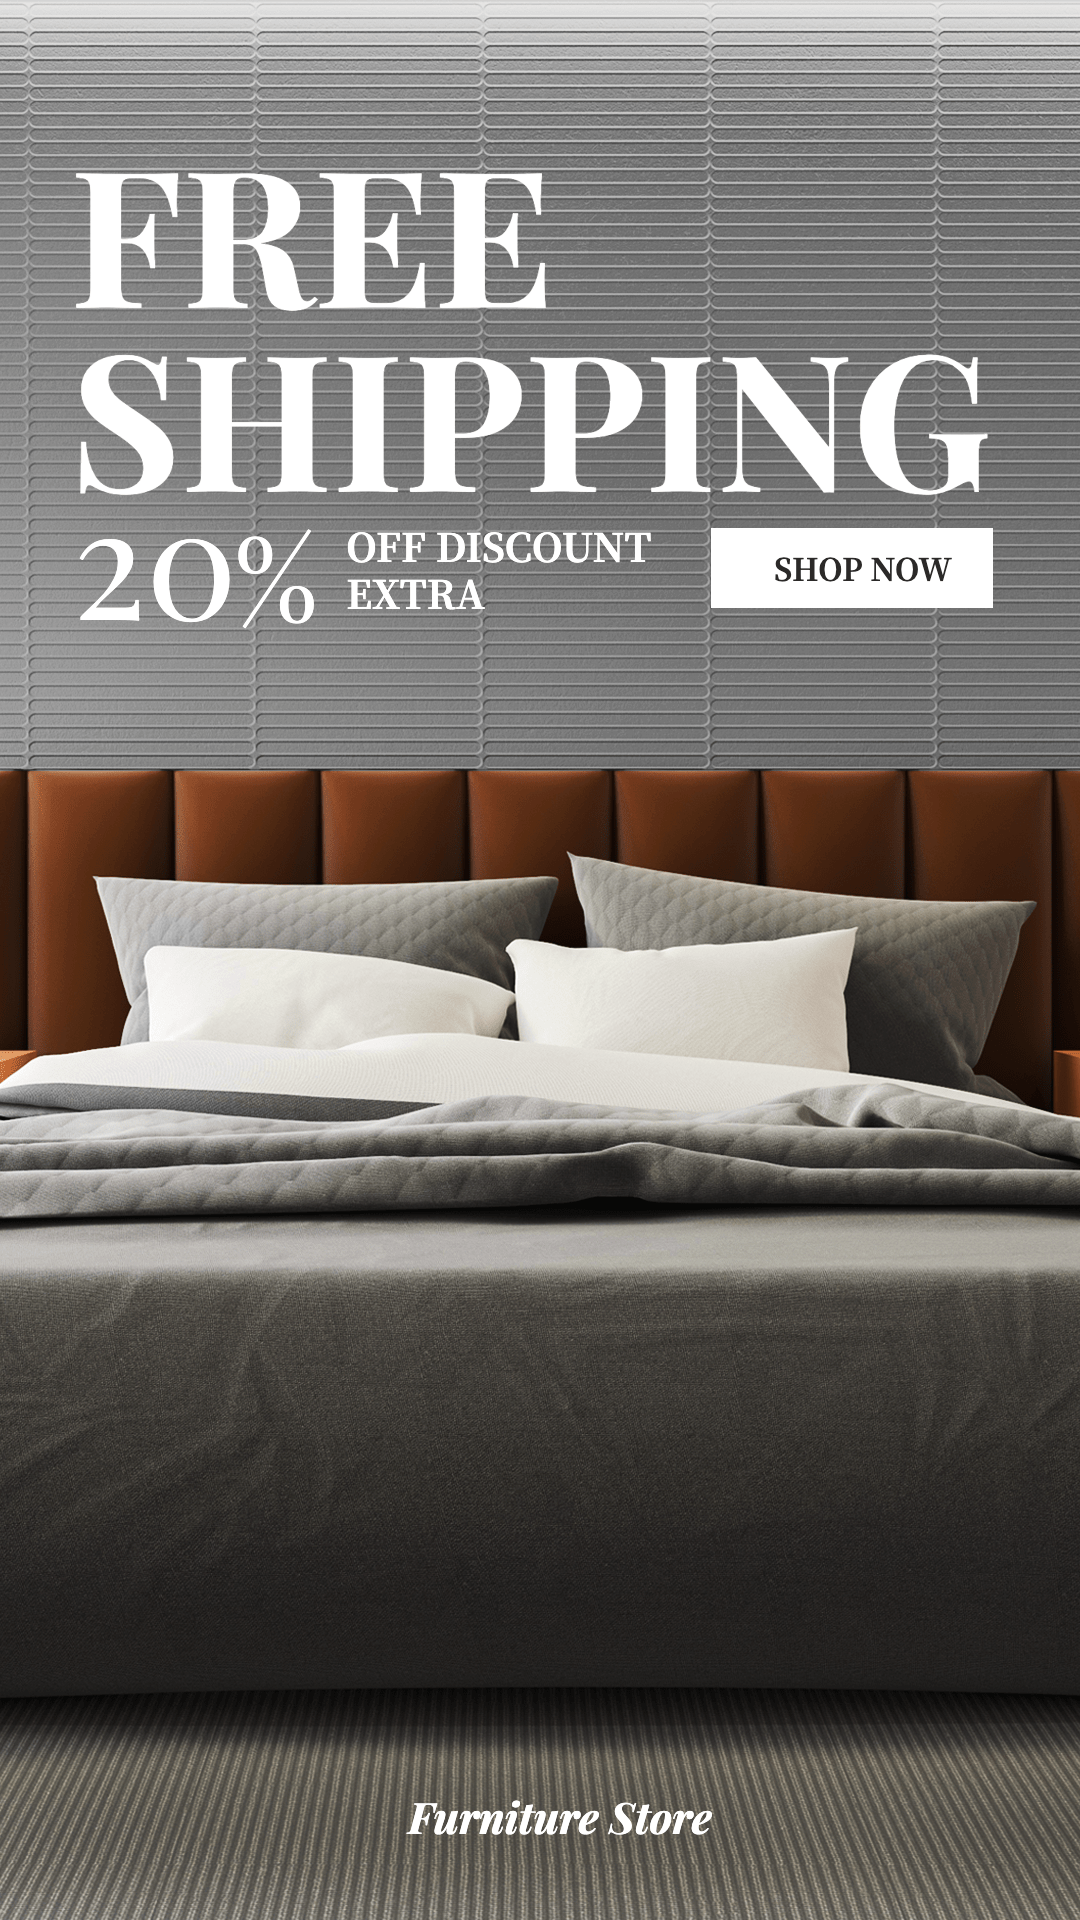 Bed Display Free Delivery Day Home Furniture Sale Promotion Ecommerce Ecommerce Story预览效果